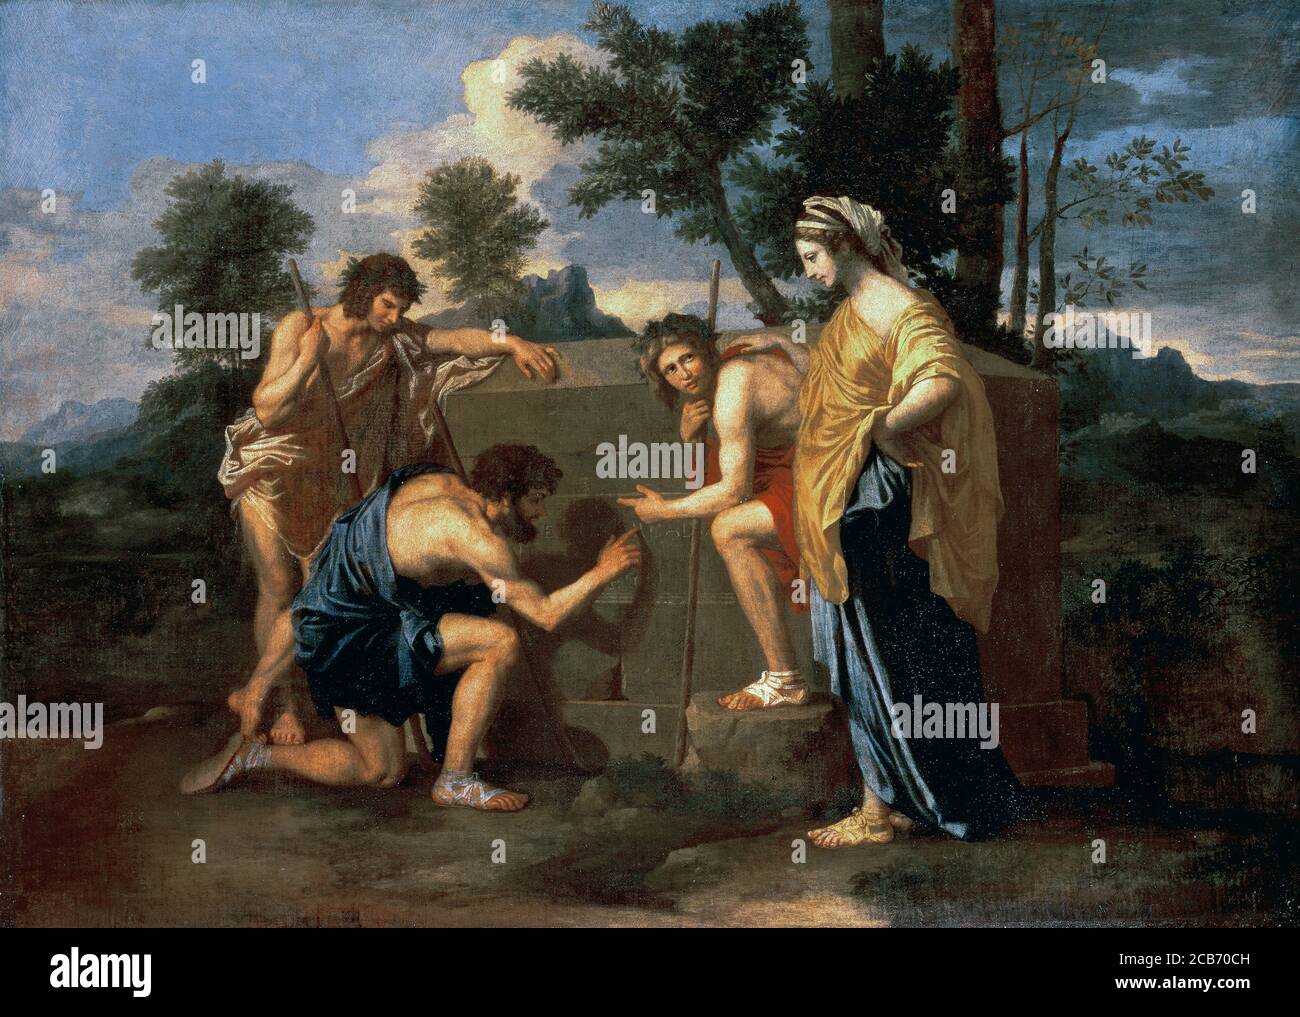 Nicolas Poussin (1594-1665). The leading painter of the classical French Baroque style. Et in Arcadia ego (The Shepherds of Arcadia), second version, (1637-1638). Oil on canvas (85 x 121 cm). Louvre Museum. Paris, France. Stock Photo